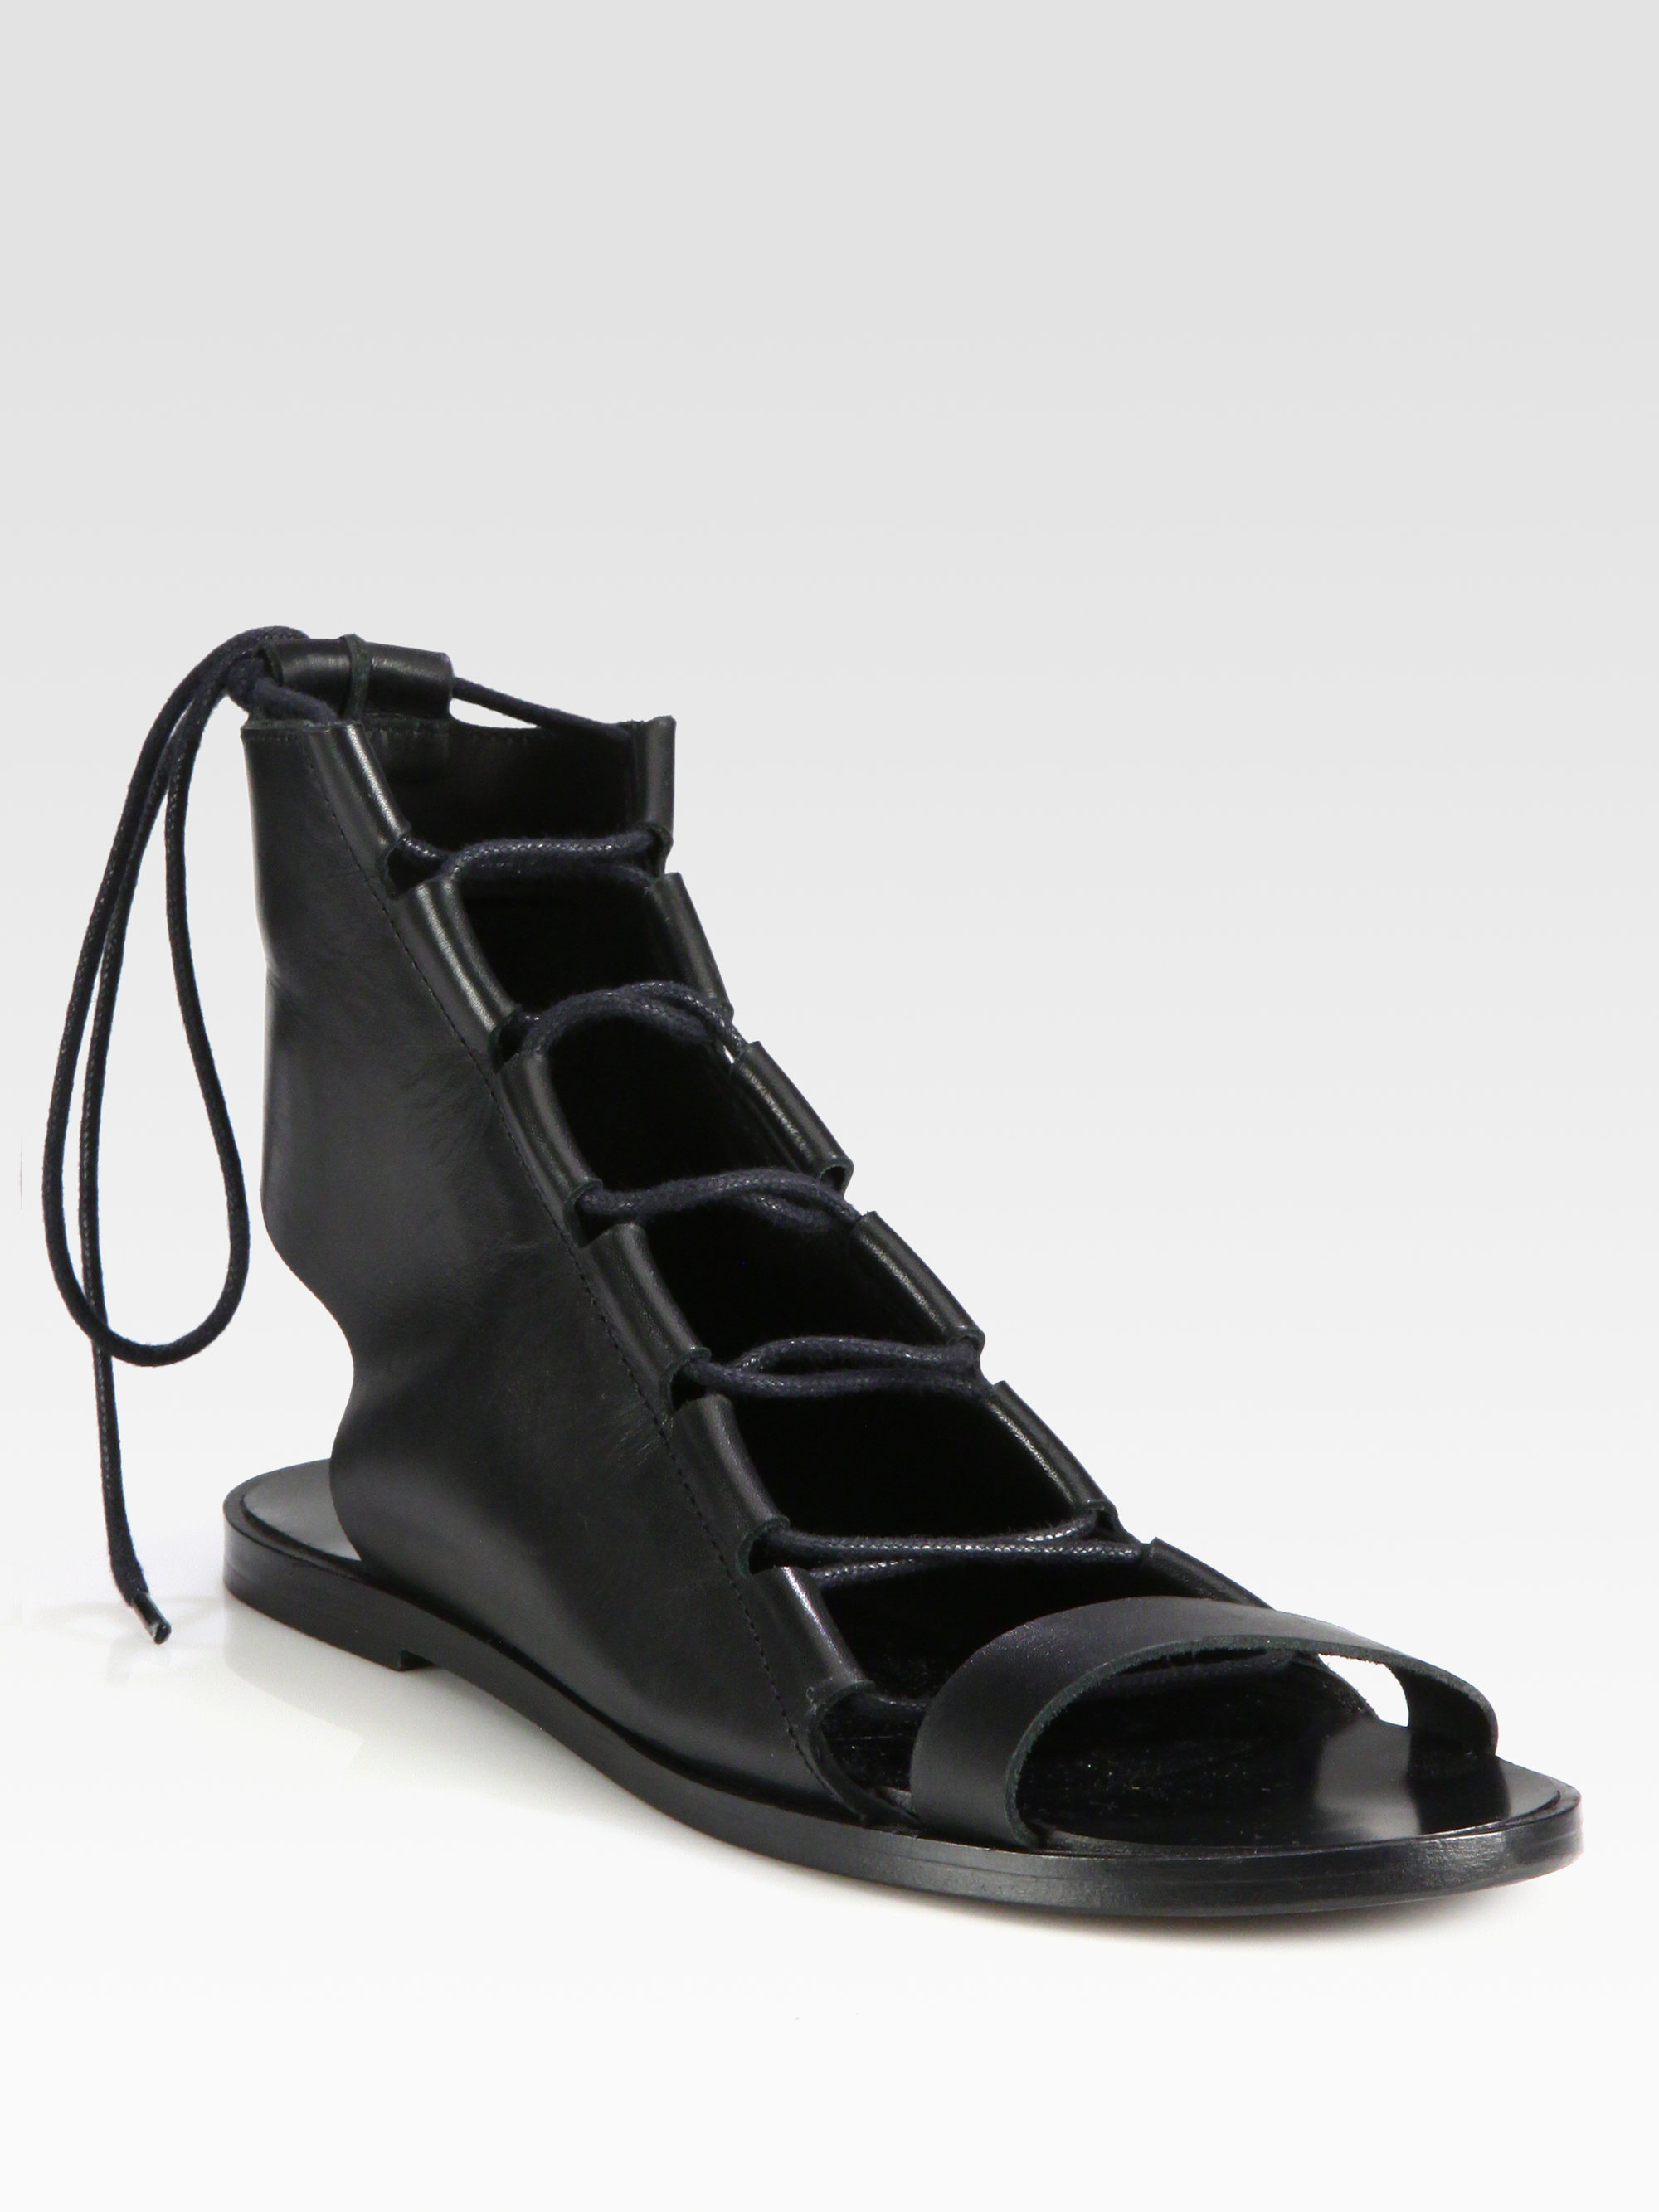 Pierre hardy Leather Lace-Up Sandals in Black | Lyst